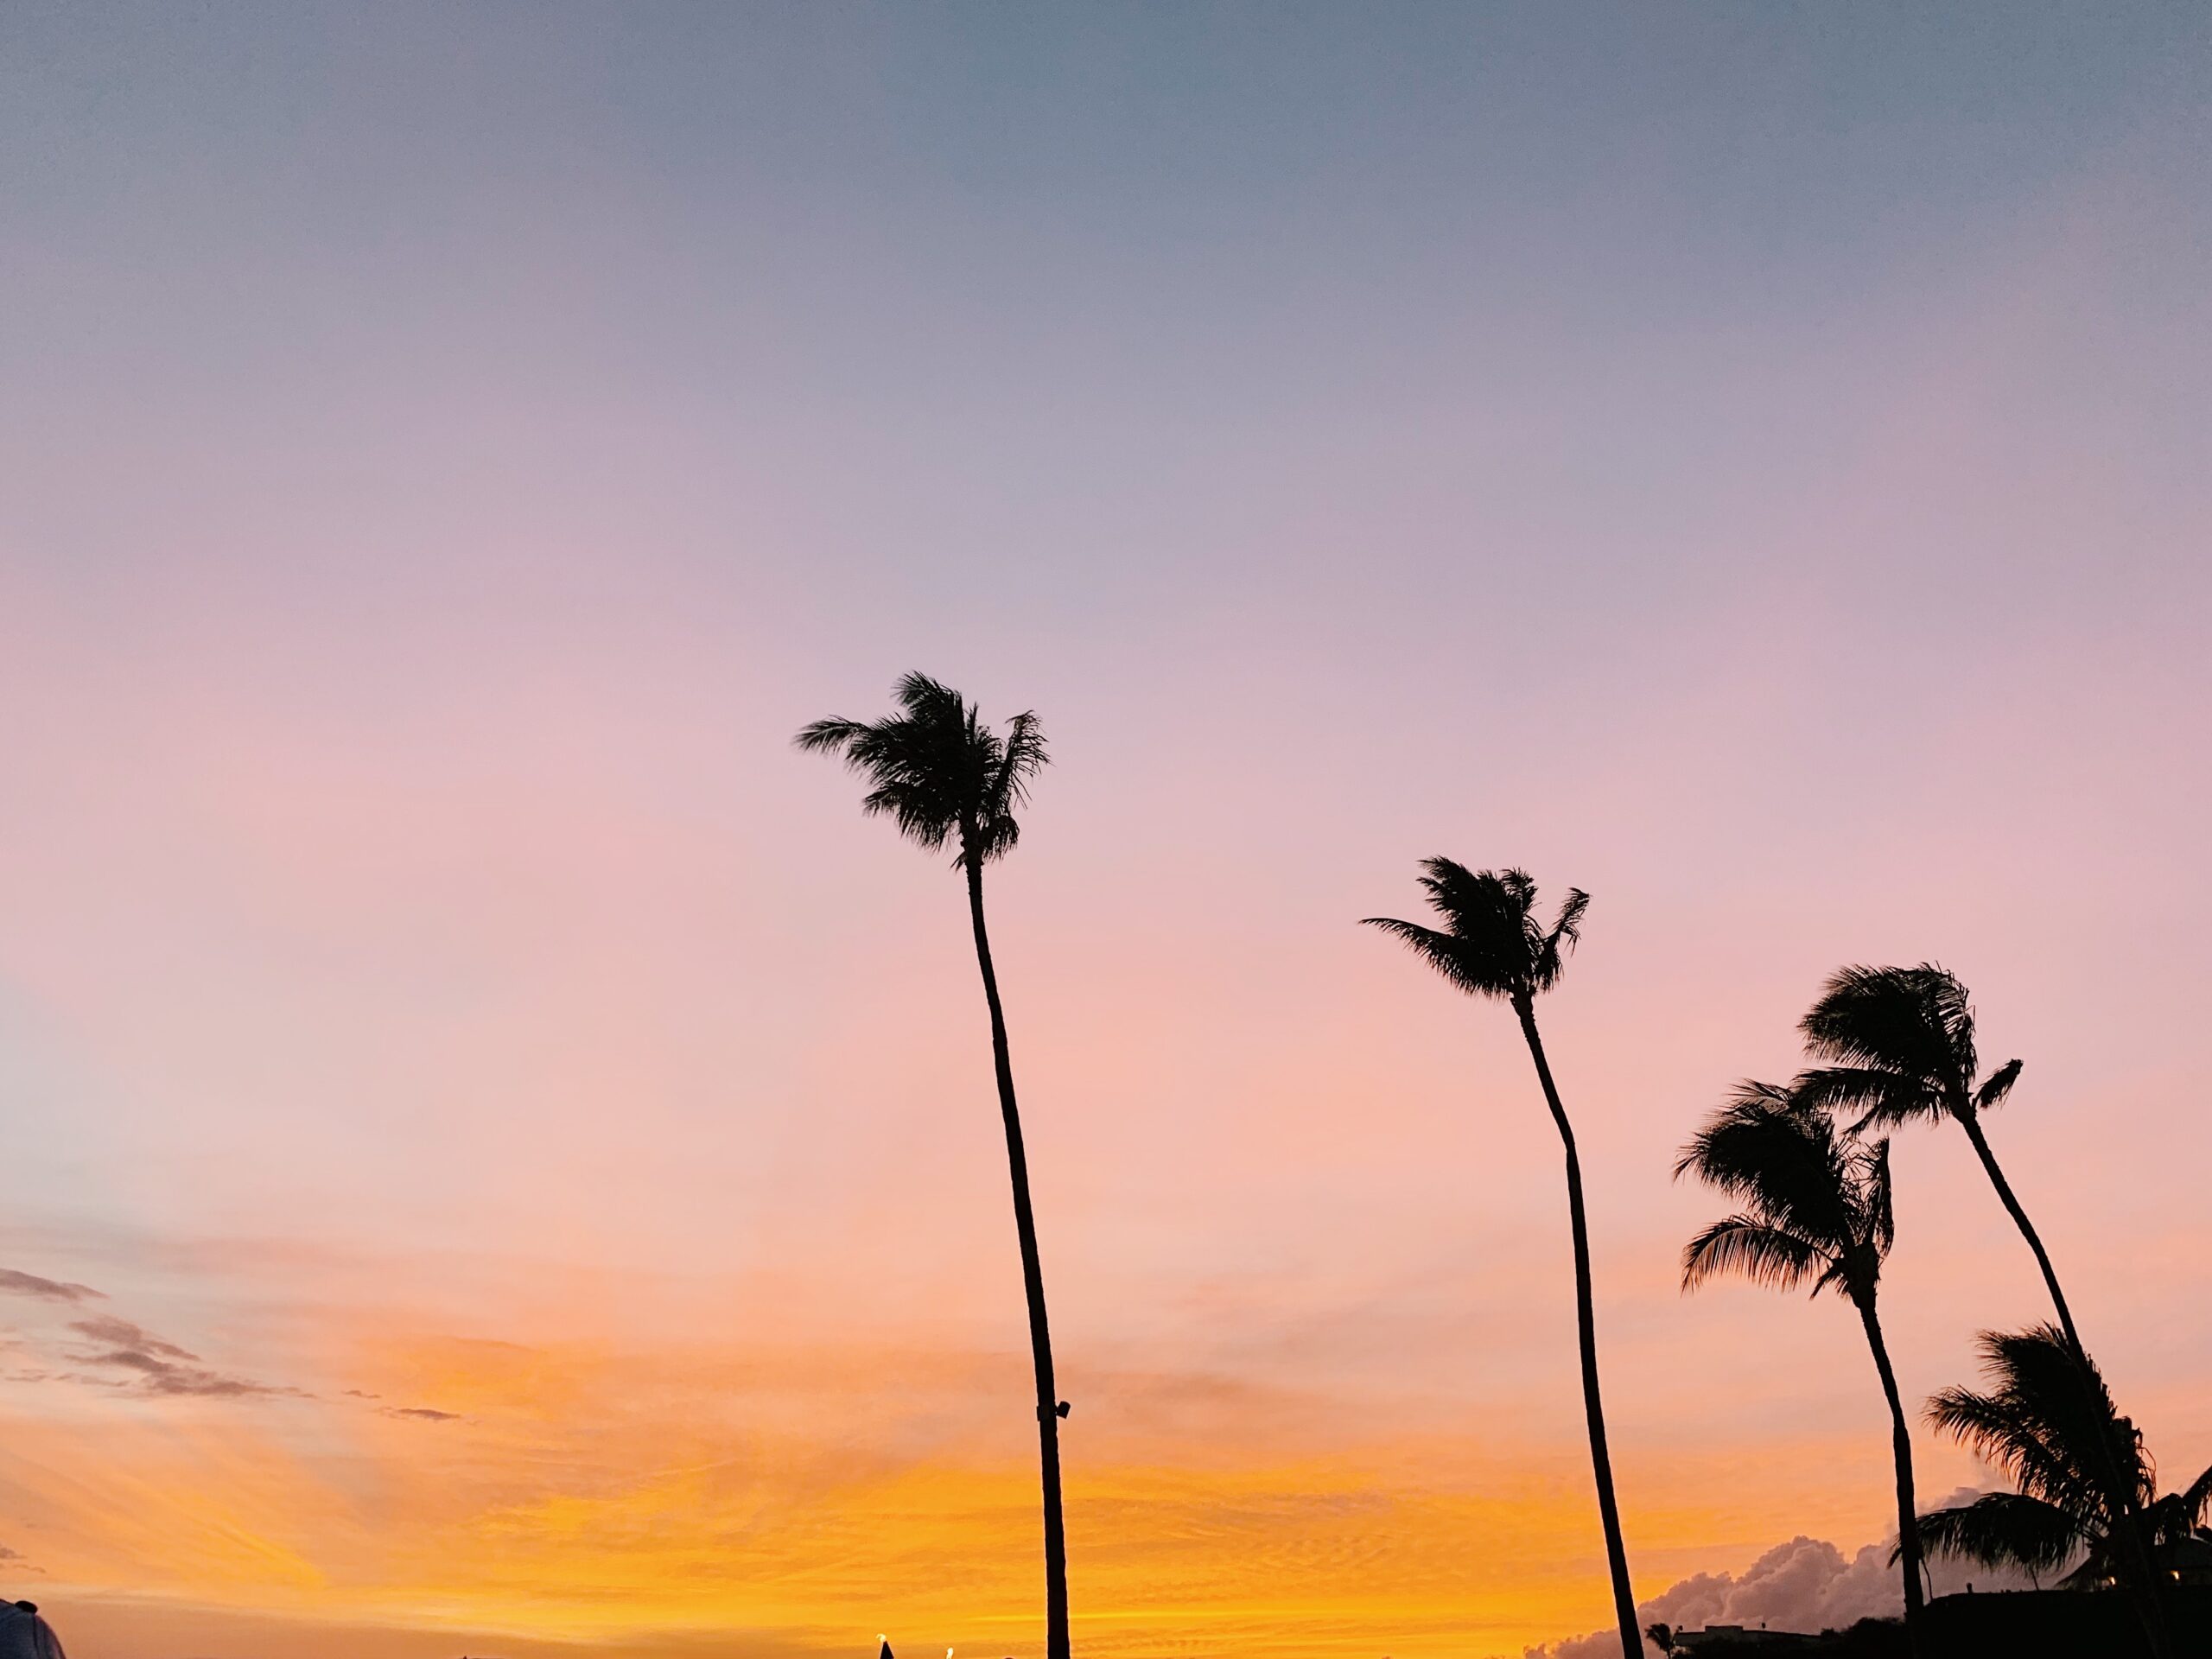 blue, orange, pink skies with silhouette of tall palm trees in maui hawaii.